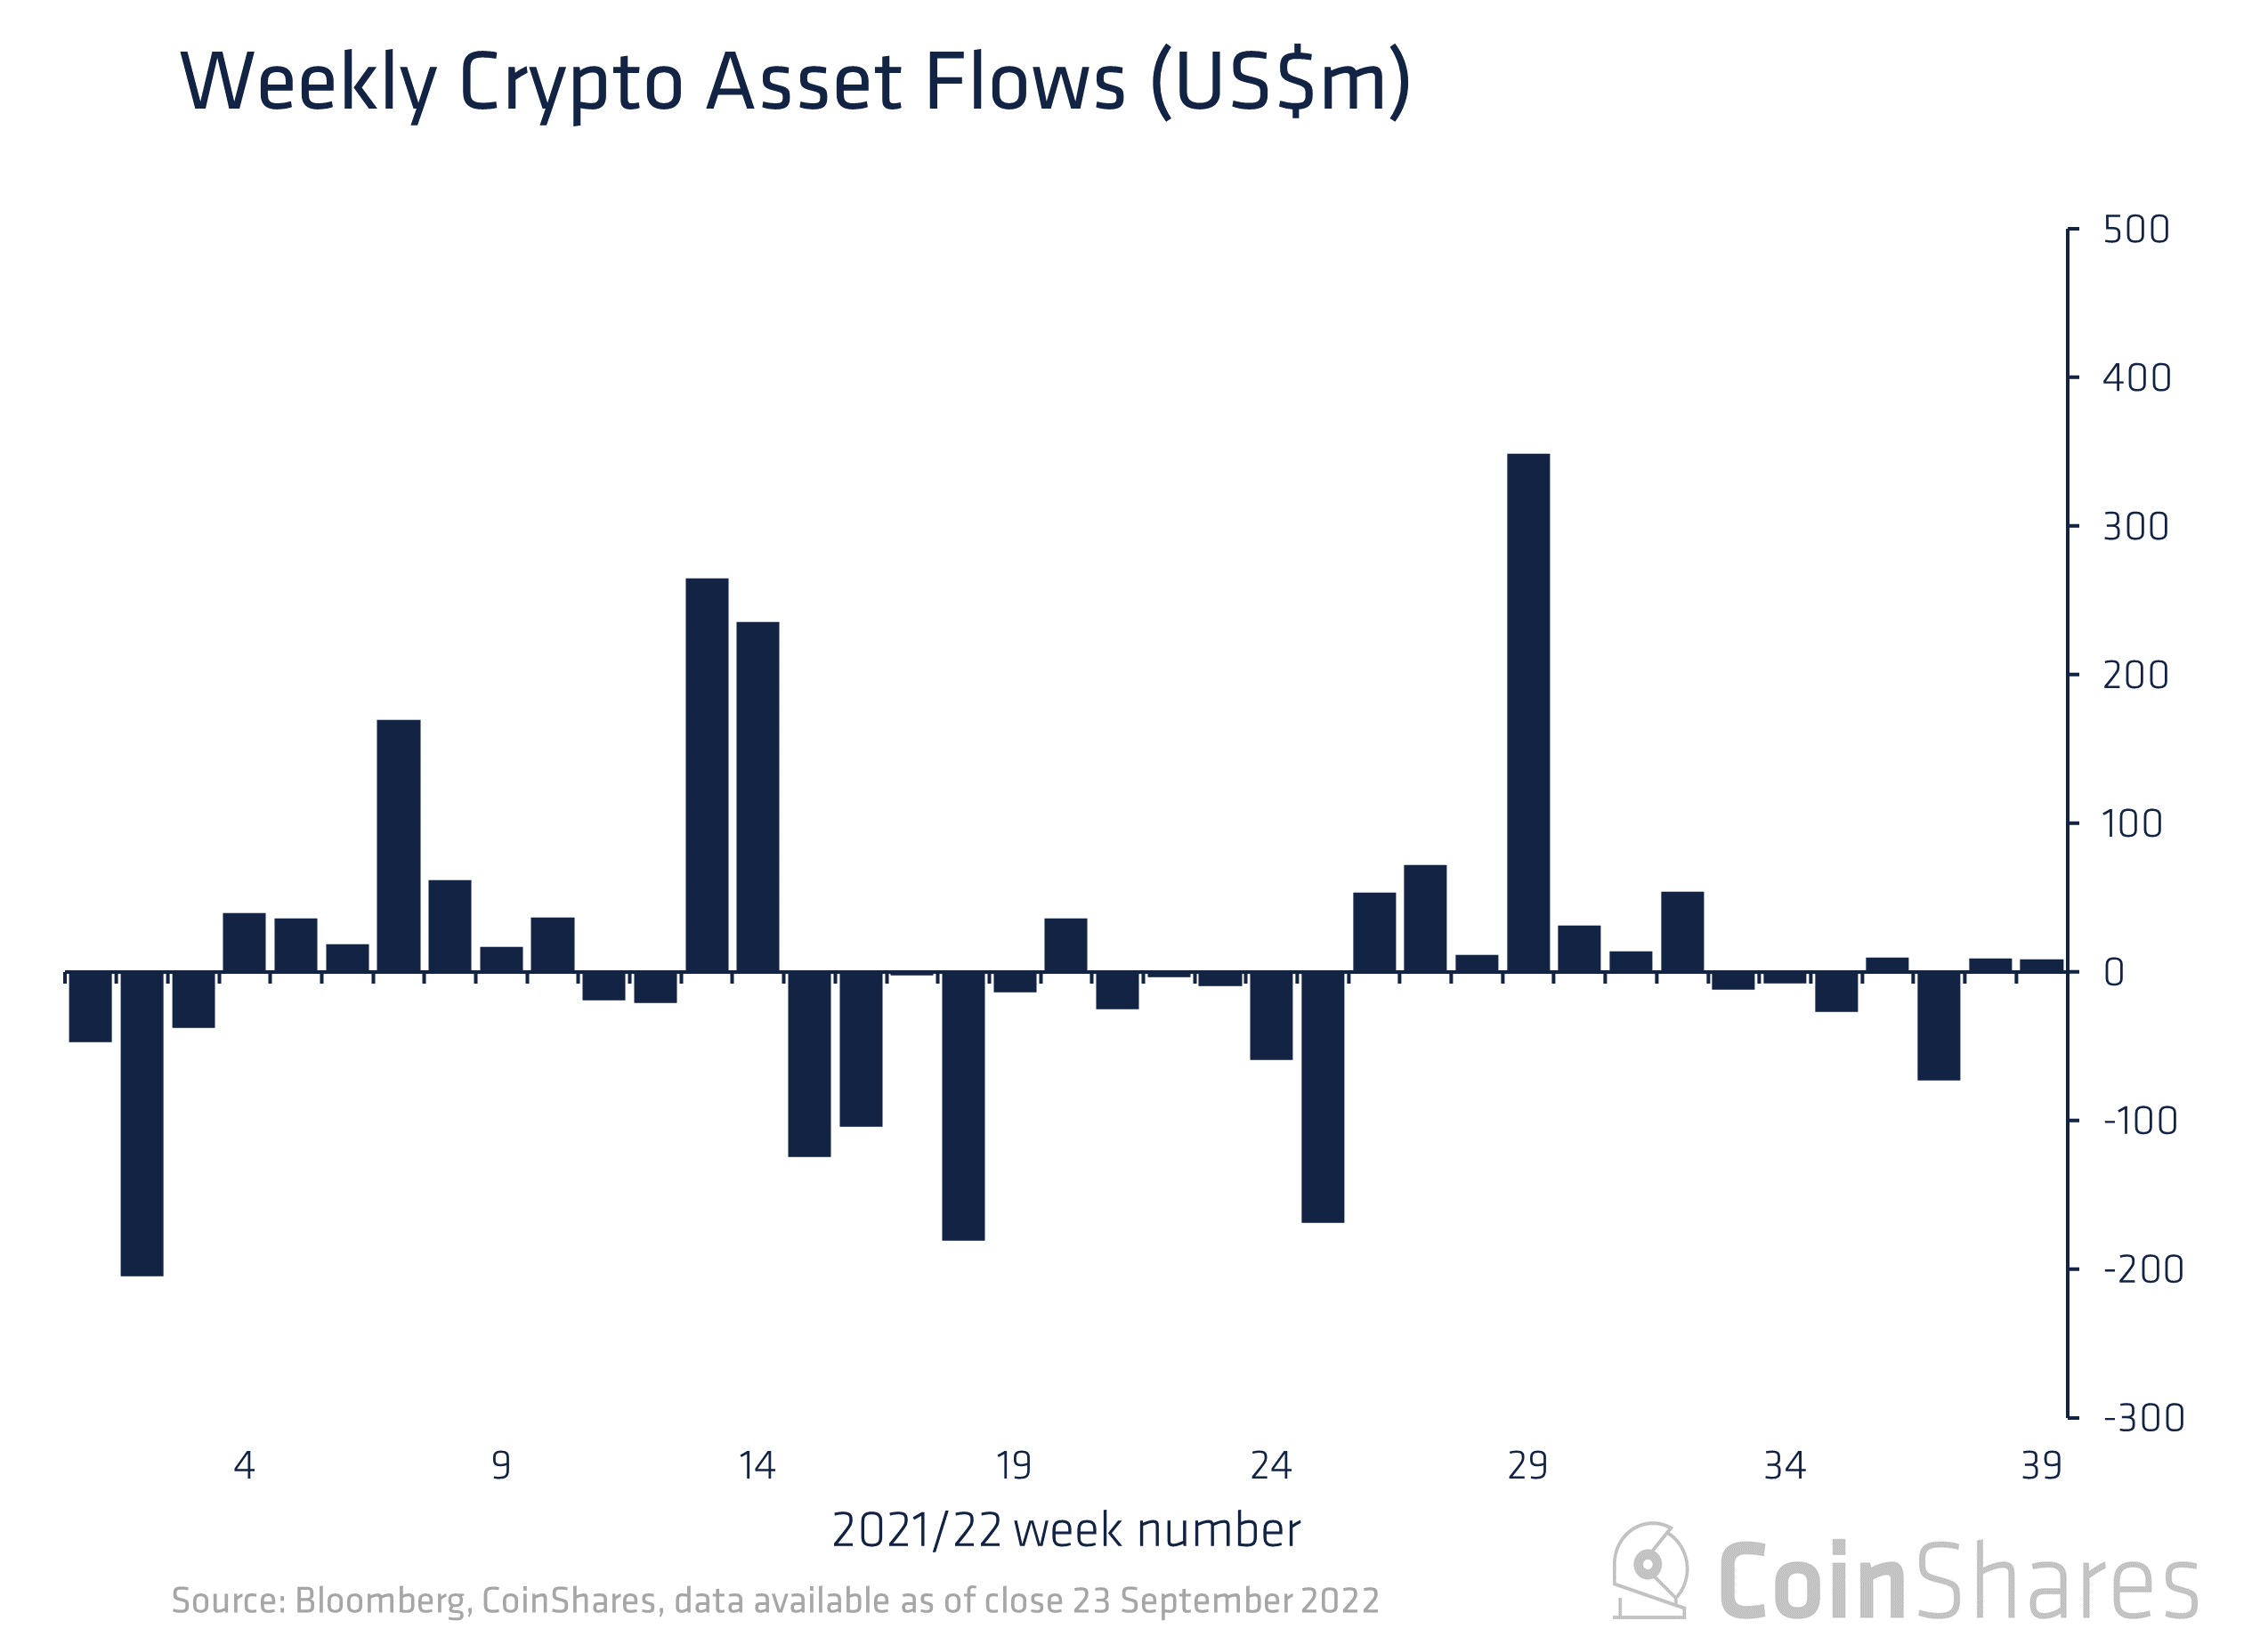 CoinShares: Investors have invested $8.3 million in digital assets in a week